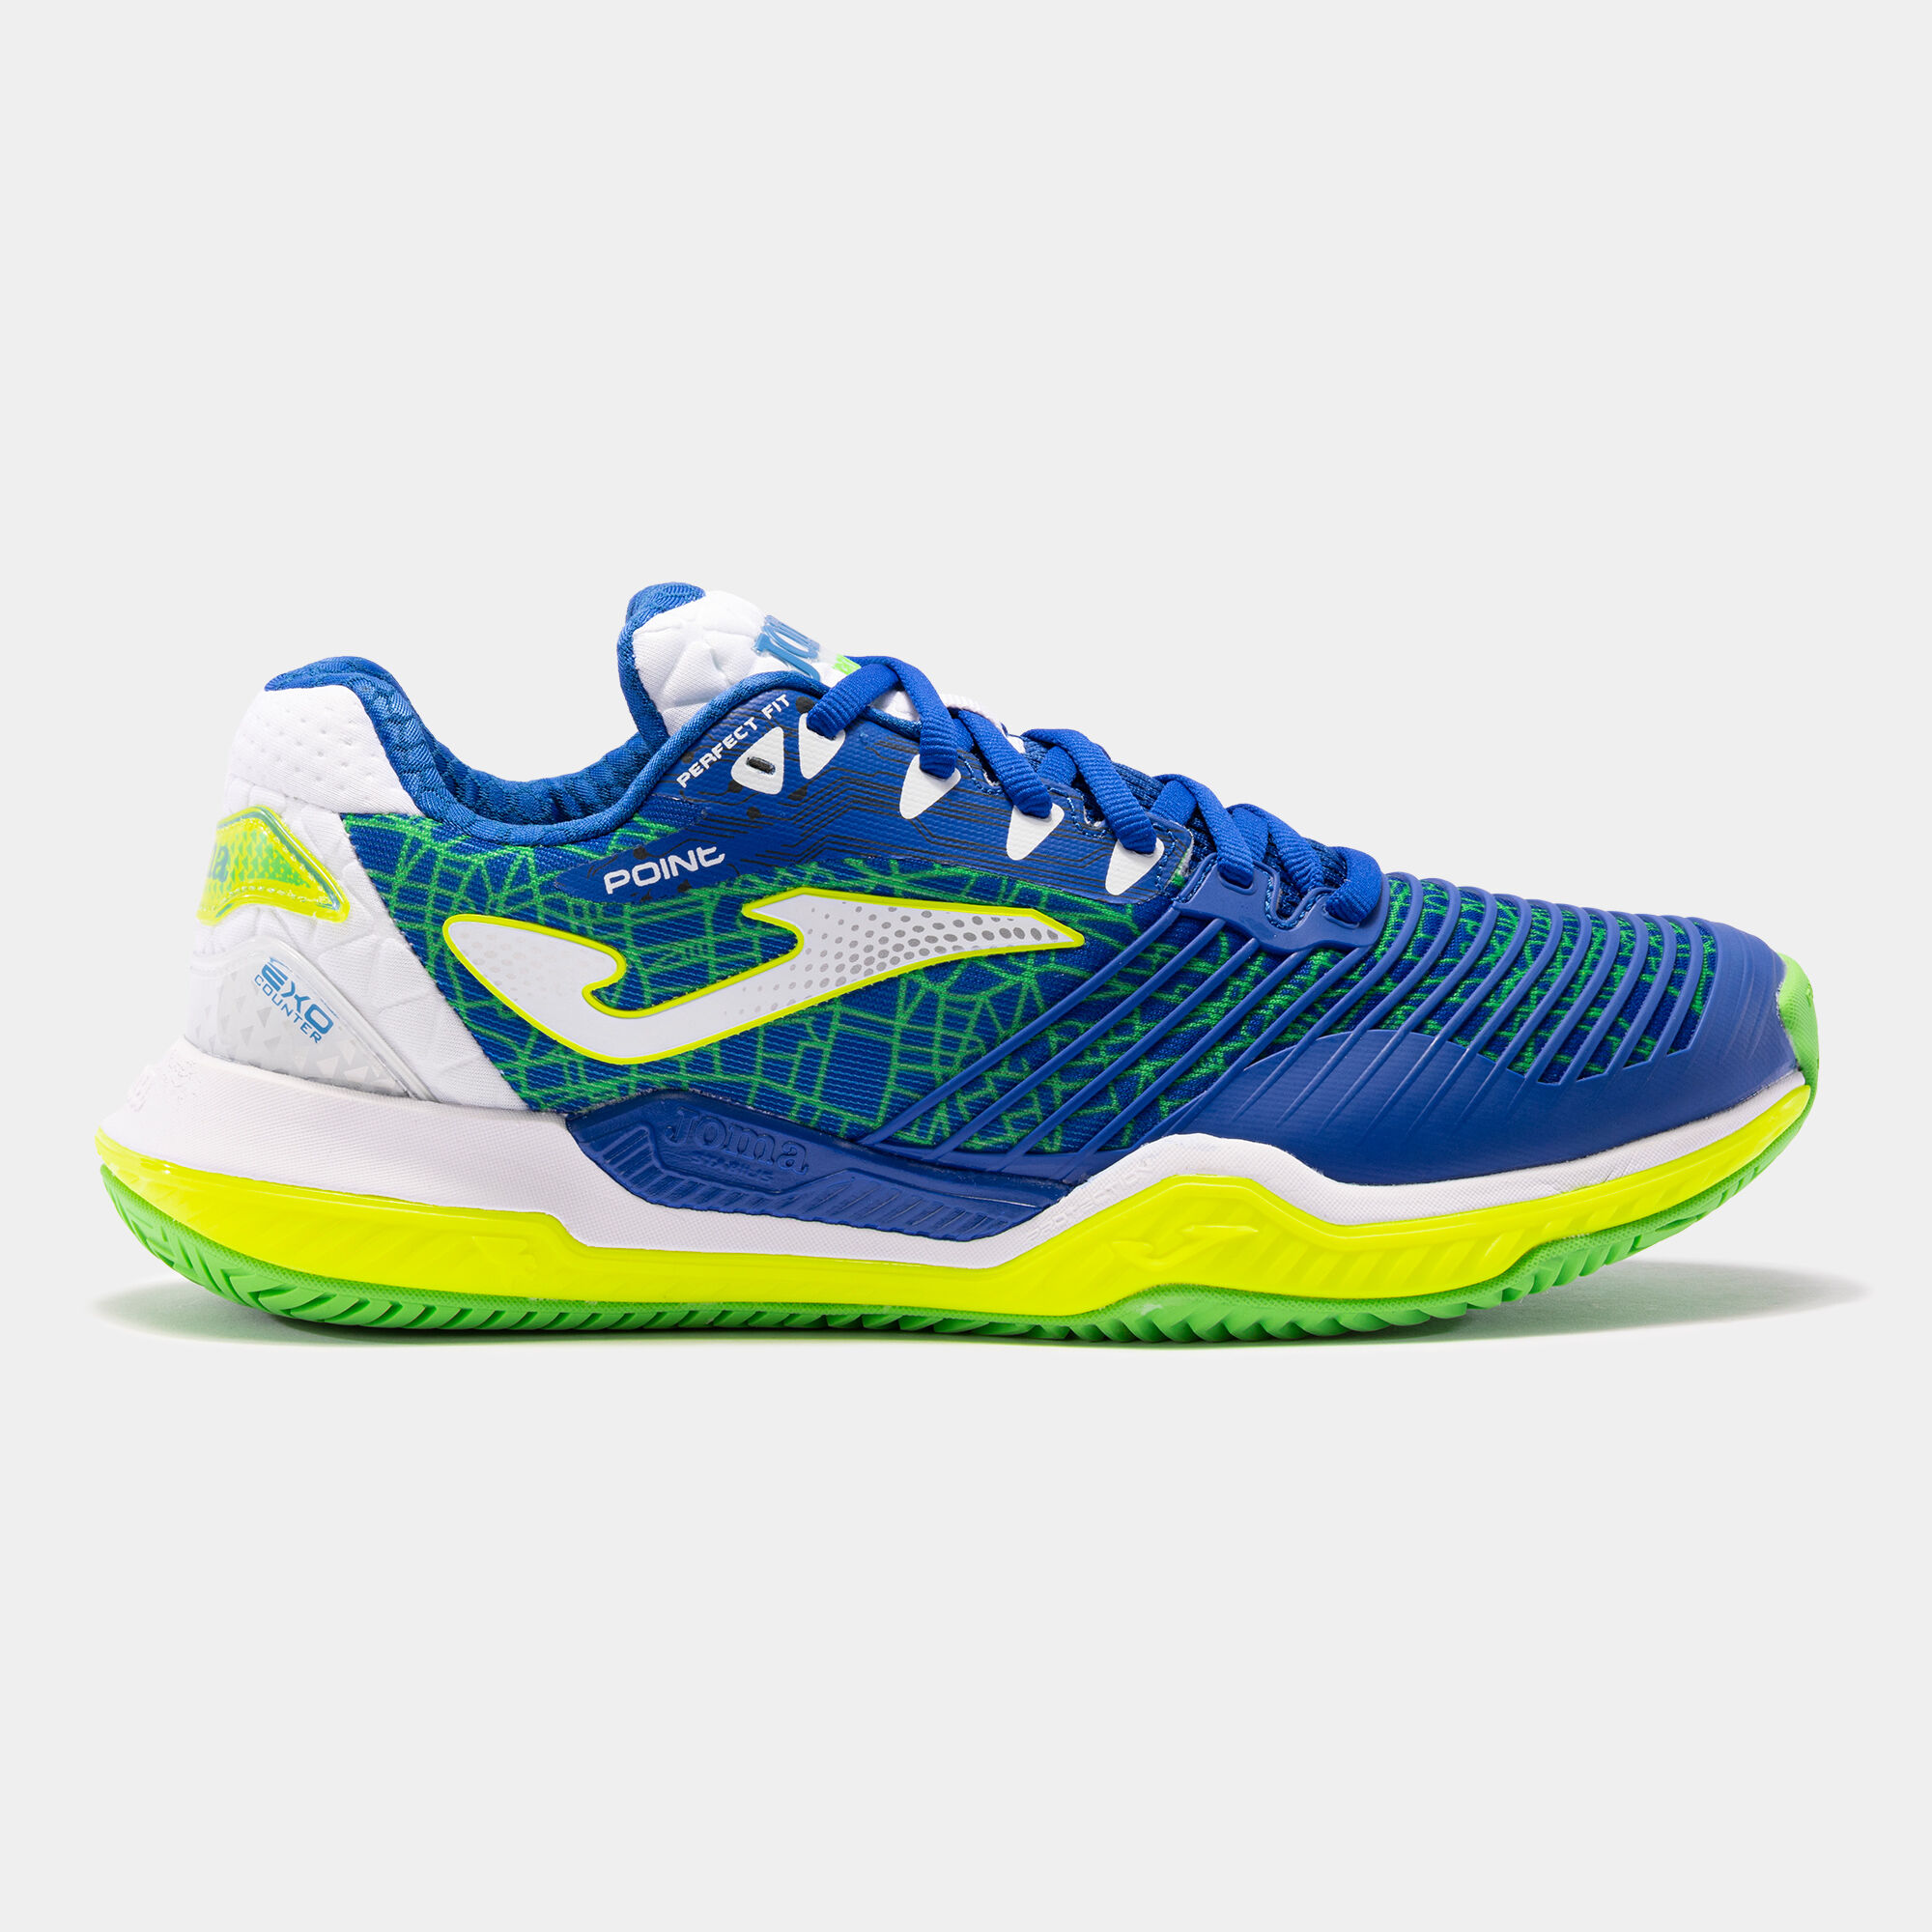 SHOES POINT 22 HARD COURT MAN ROYAL BLUE FLUORESCENT YELLOW